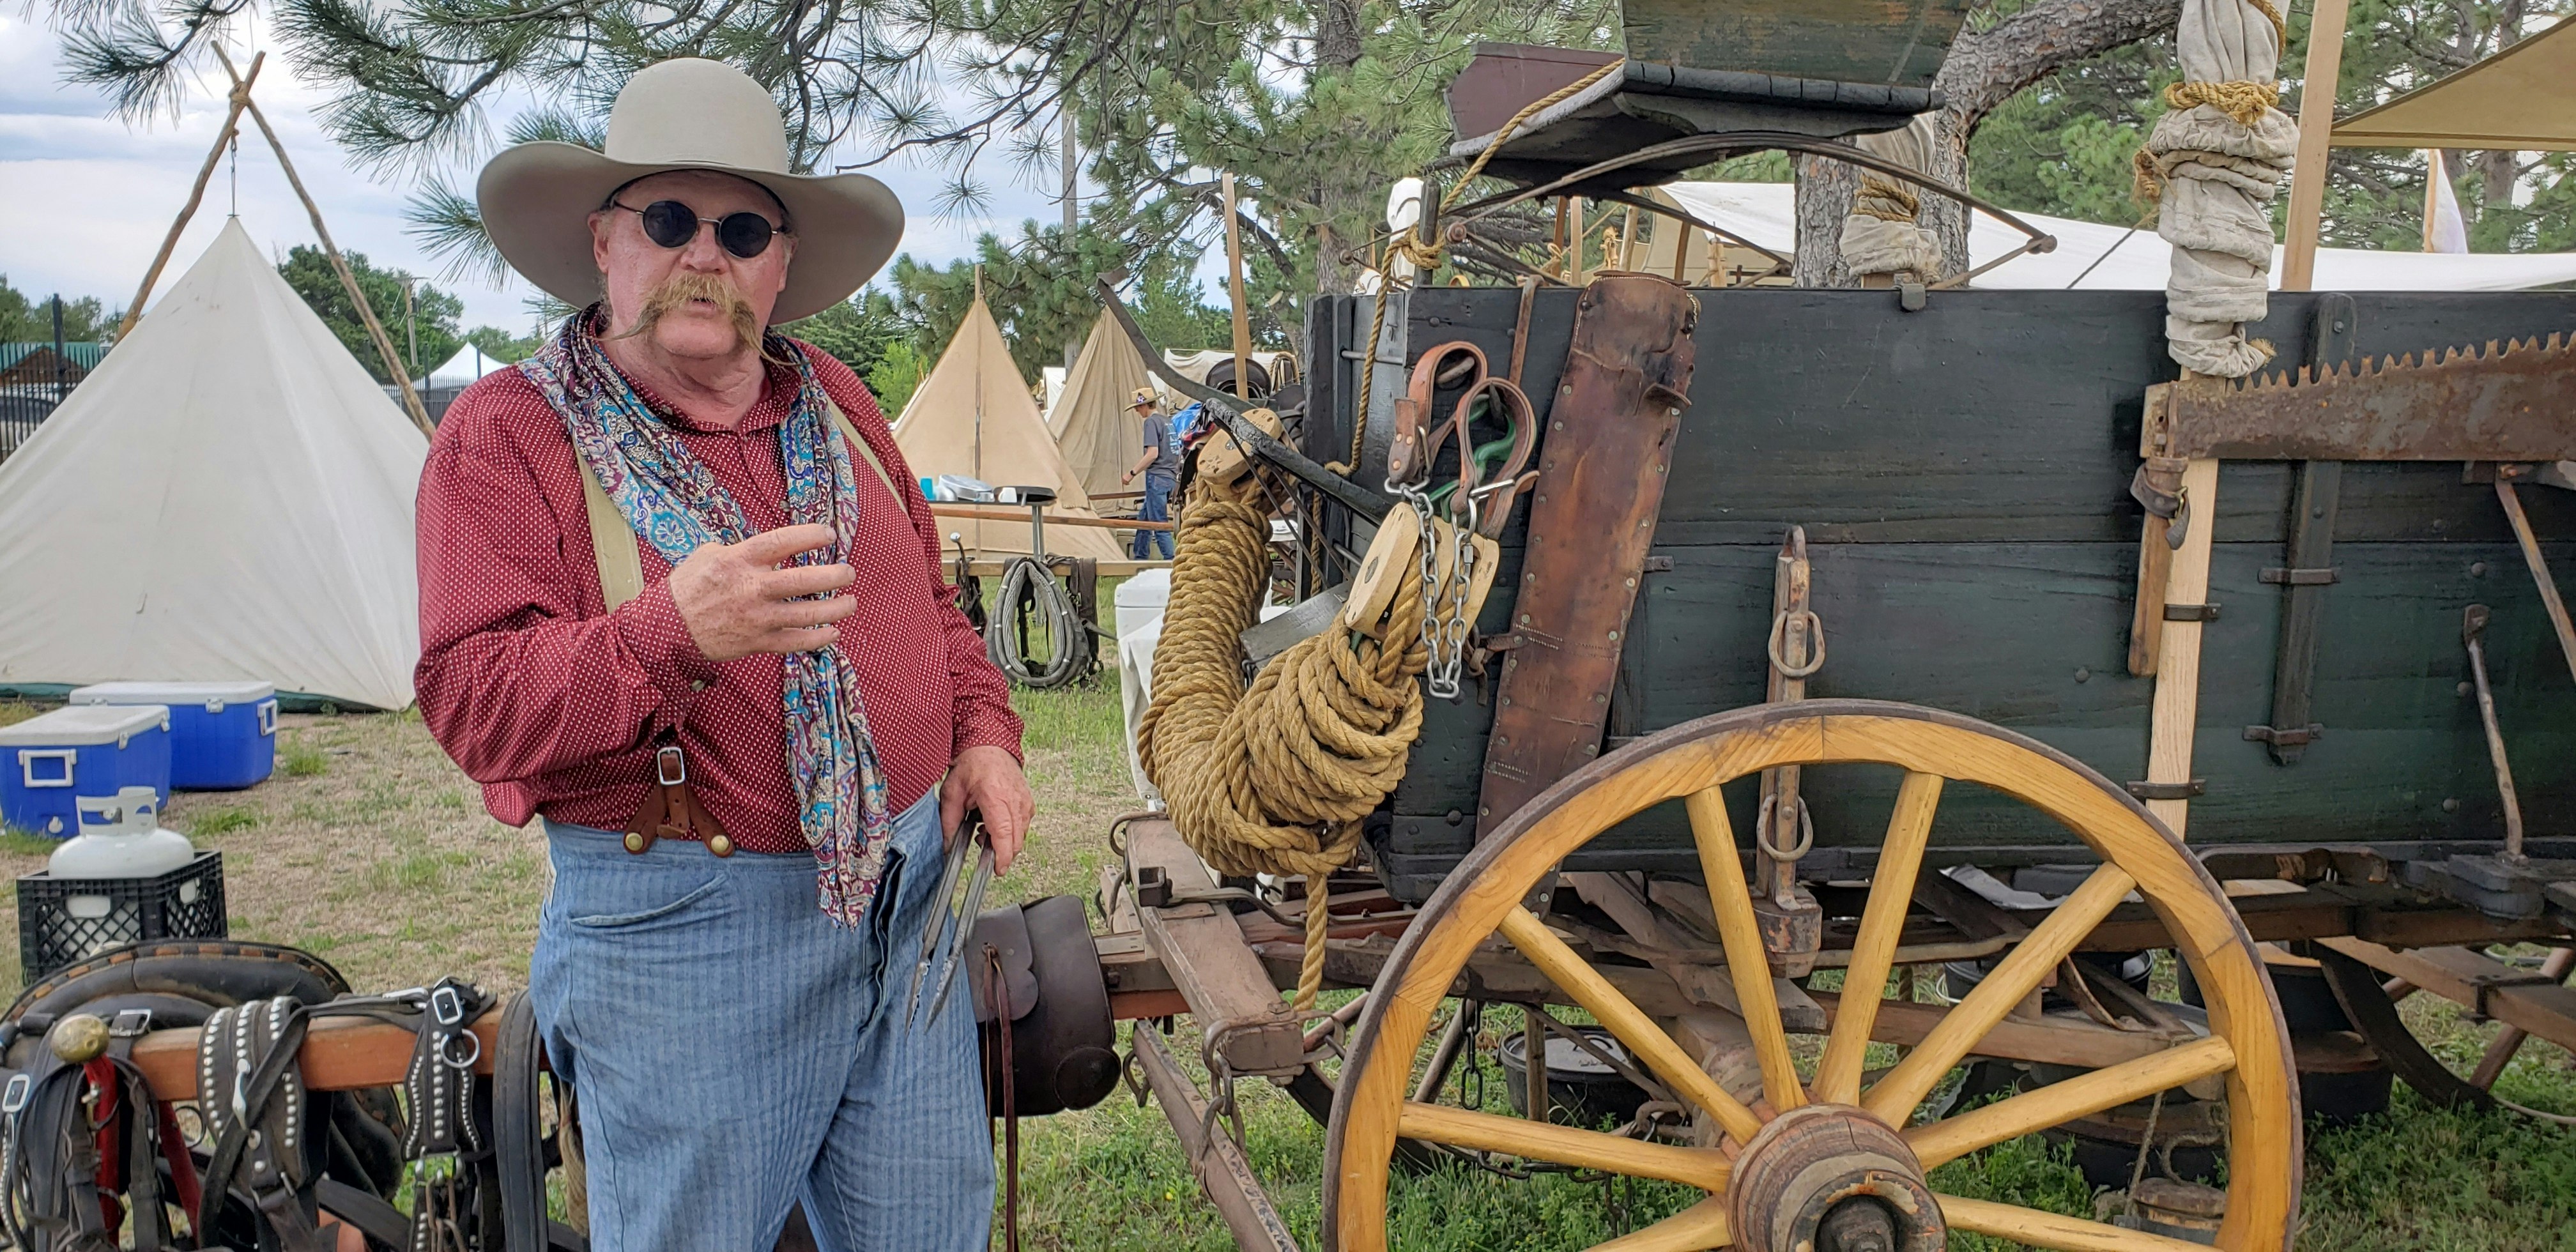 Rich Herman talks about the 1902 Peter Schuttler Wagon he and his wife Deb use for chuckwagon cooking events like the one at Cheyenne Frontier Days.